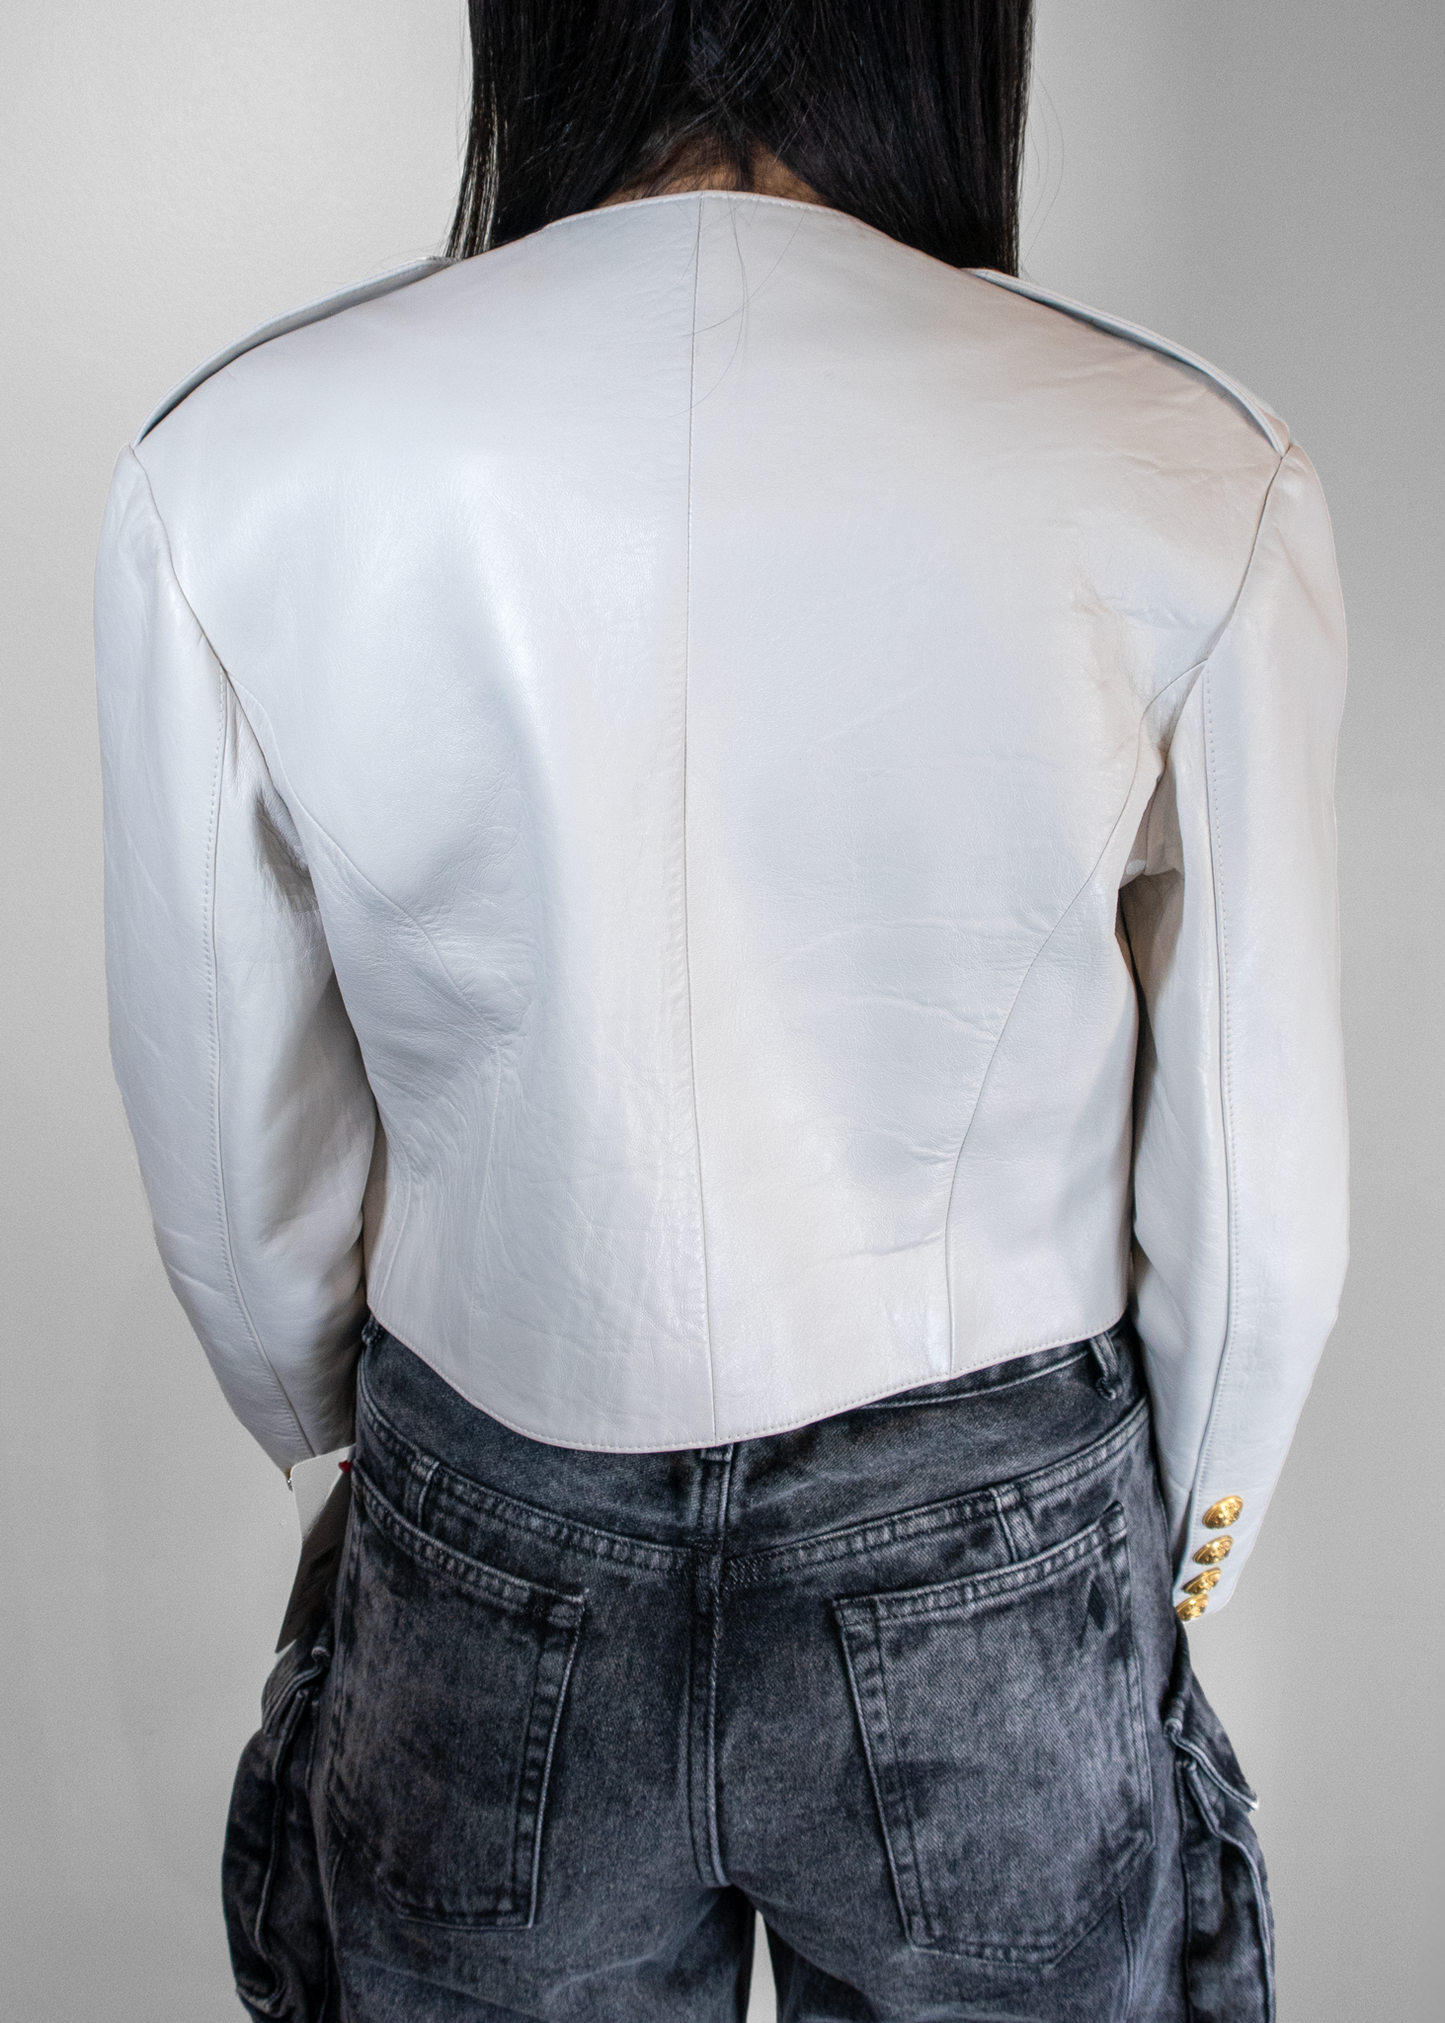 Celine White Double-Breasted Cropped Jacket